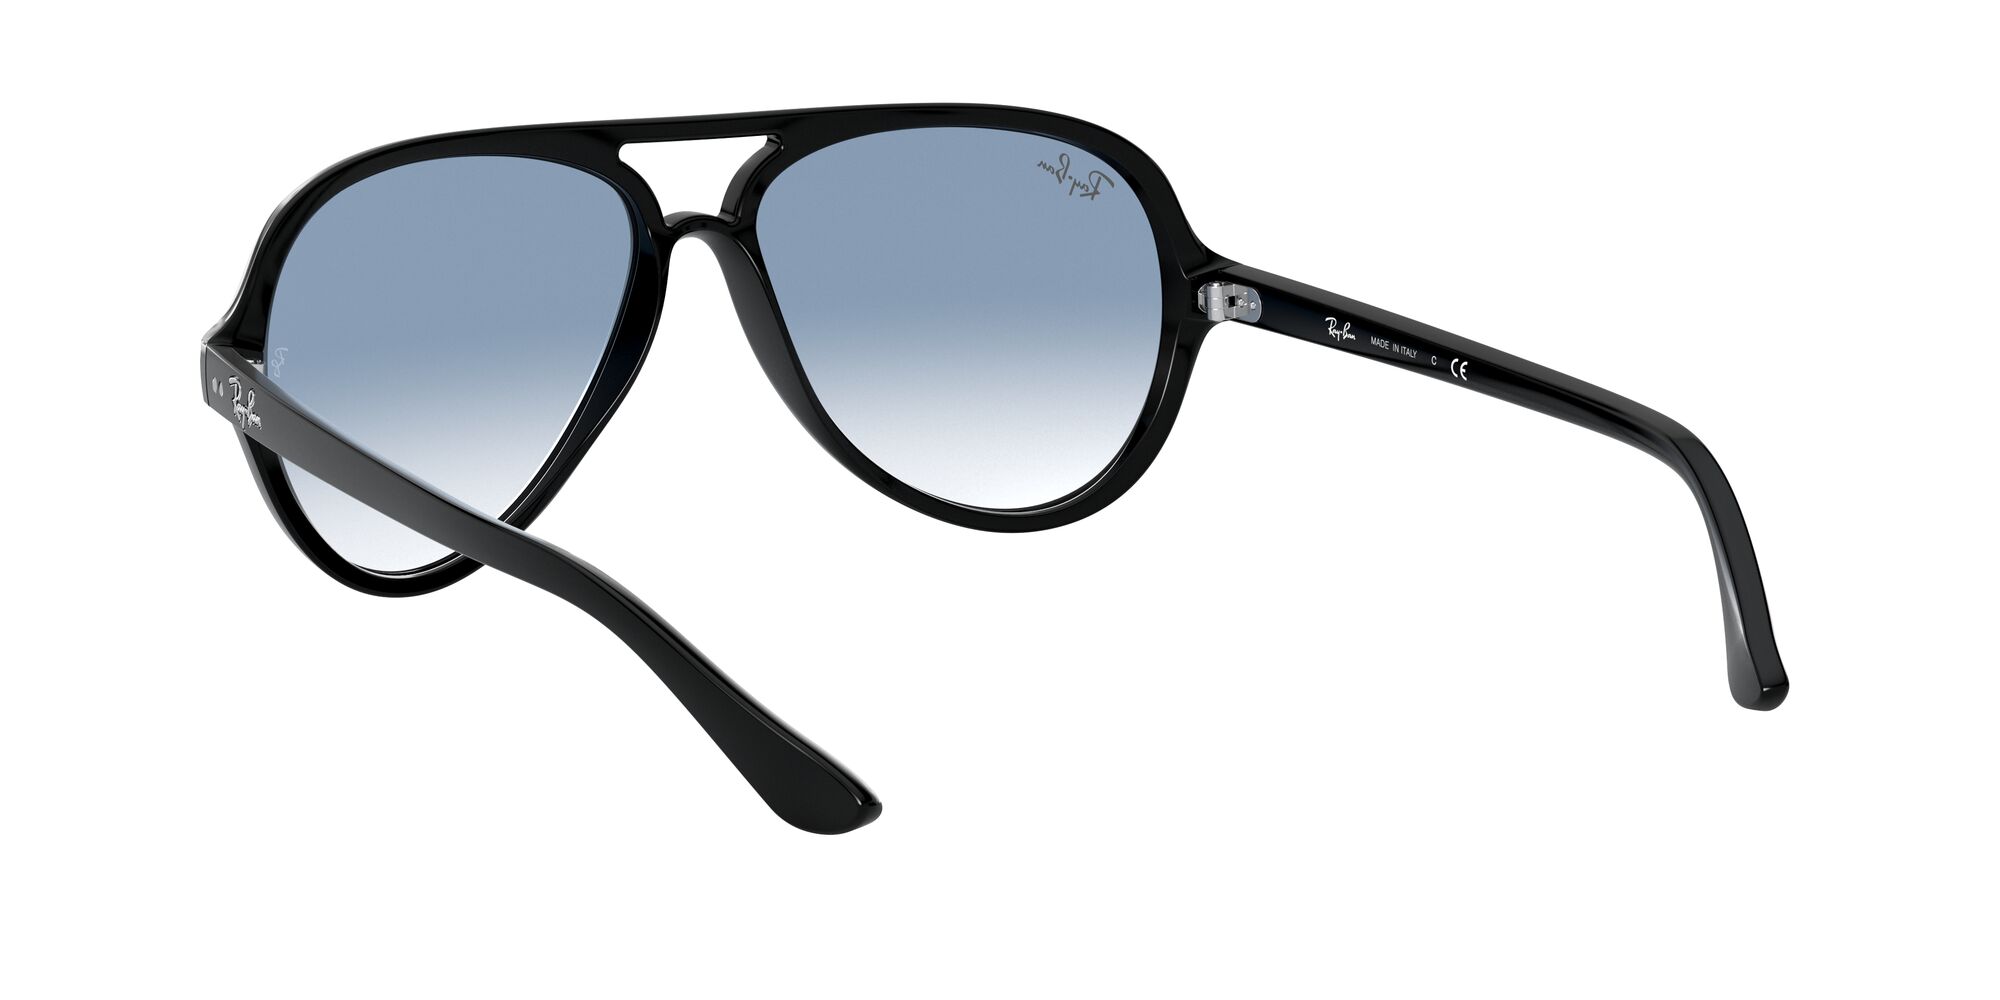 Ray-Ban RB4125 Cats 5000 Sunglasses - image 6 of 12